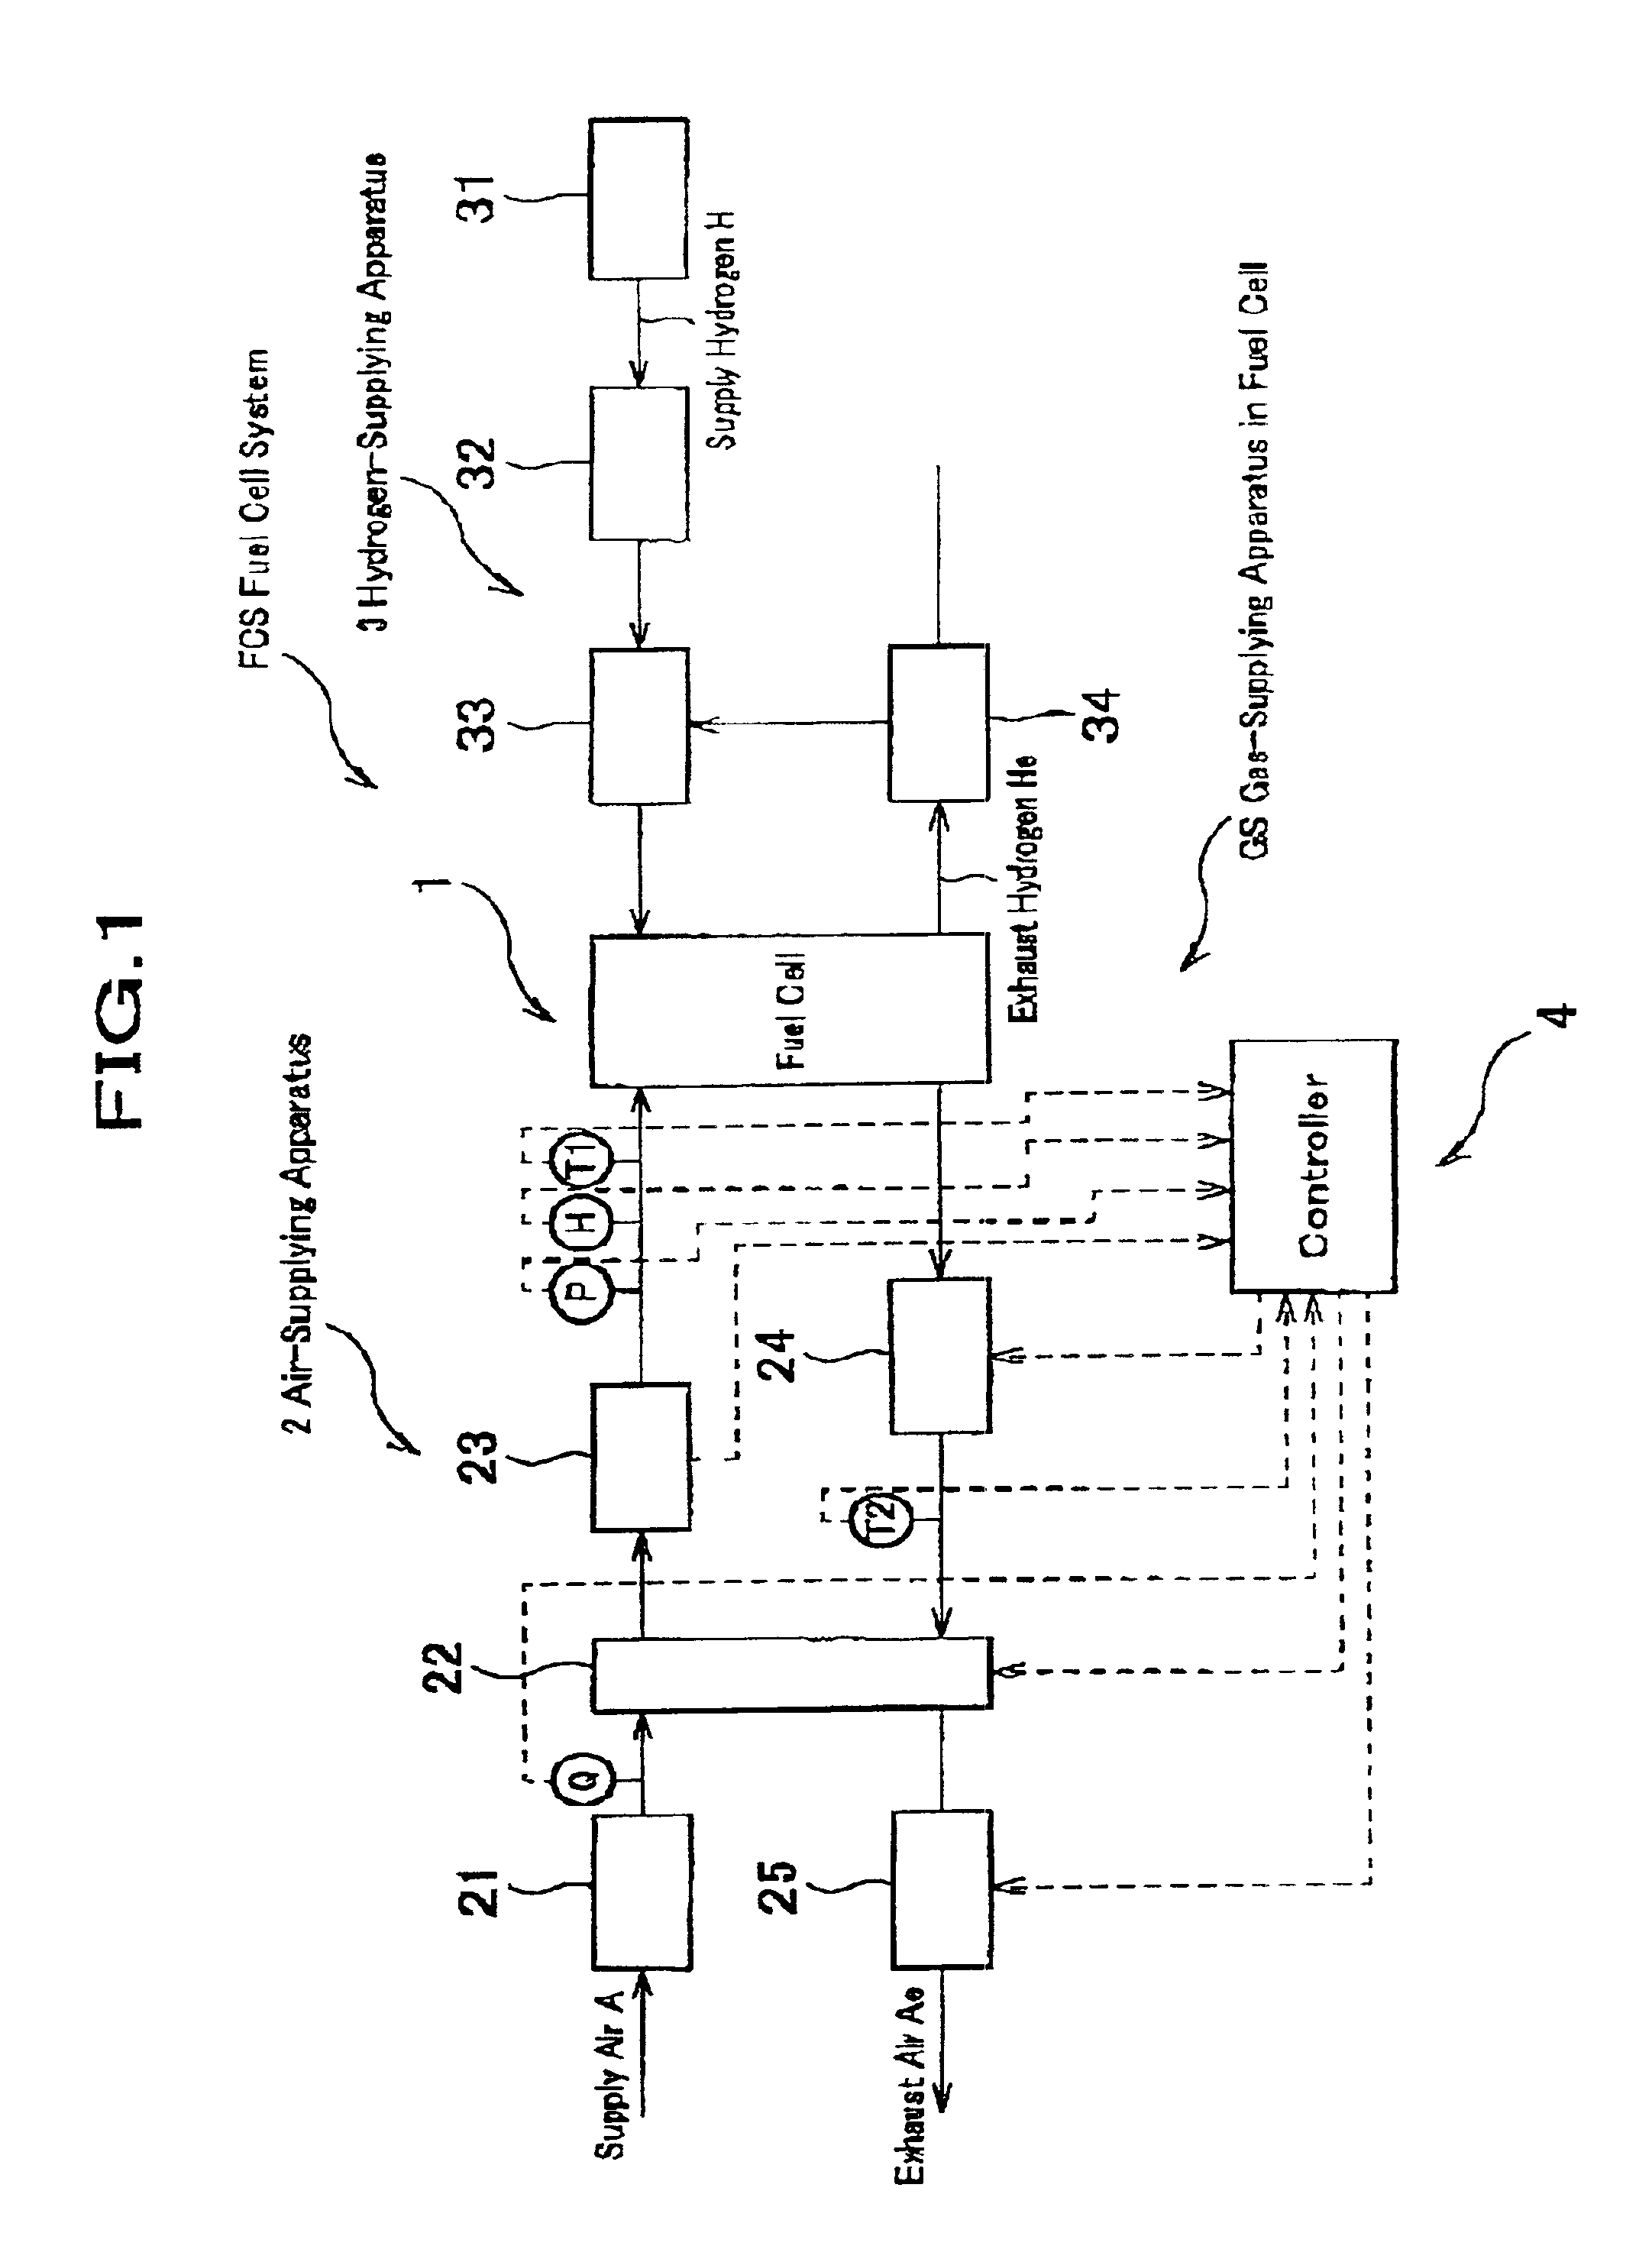 Gas-supplying apparatus for fuel cell